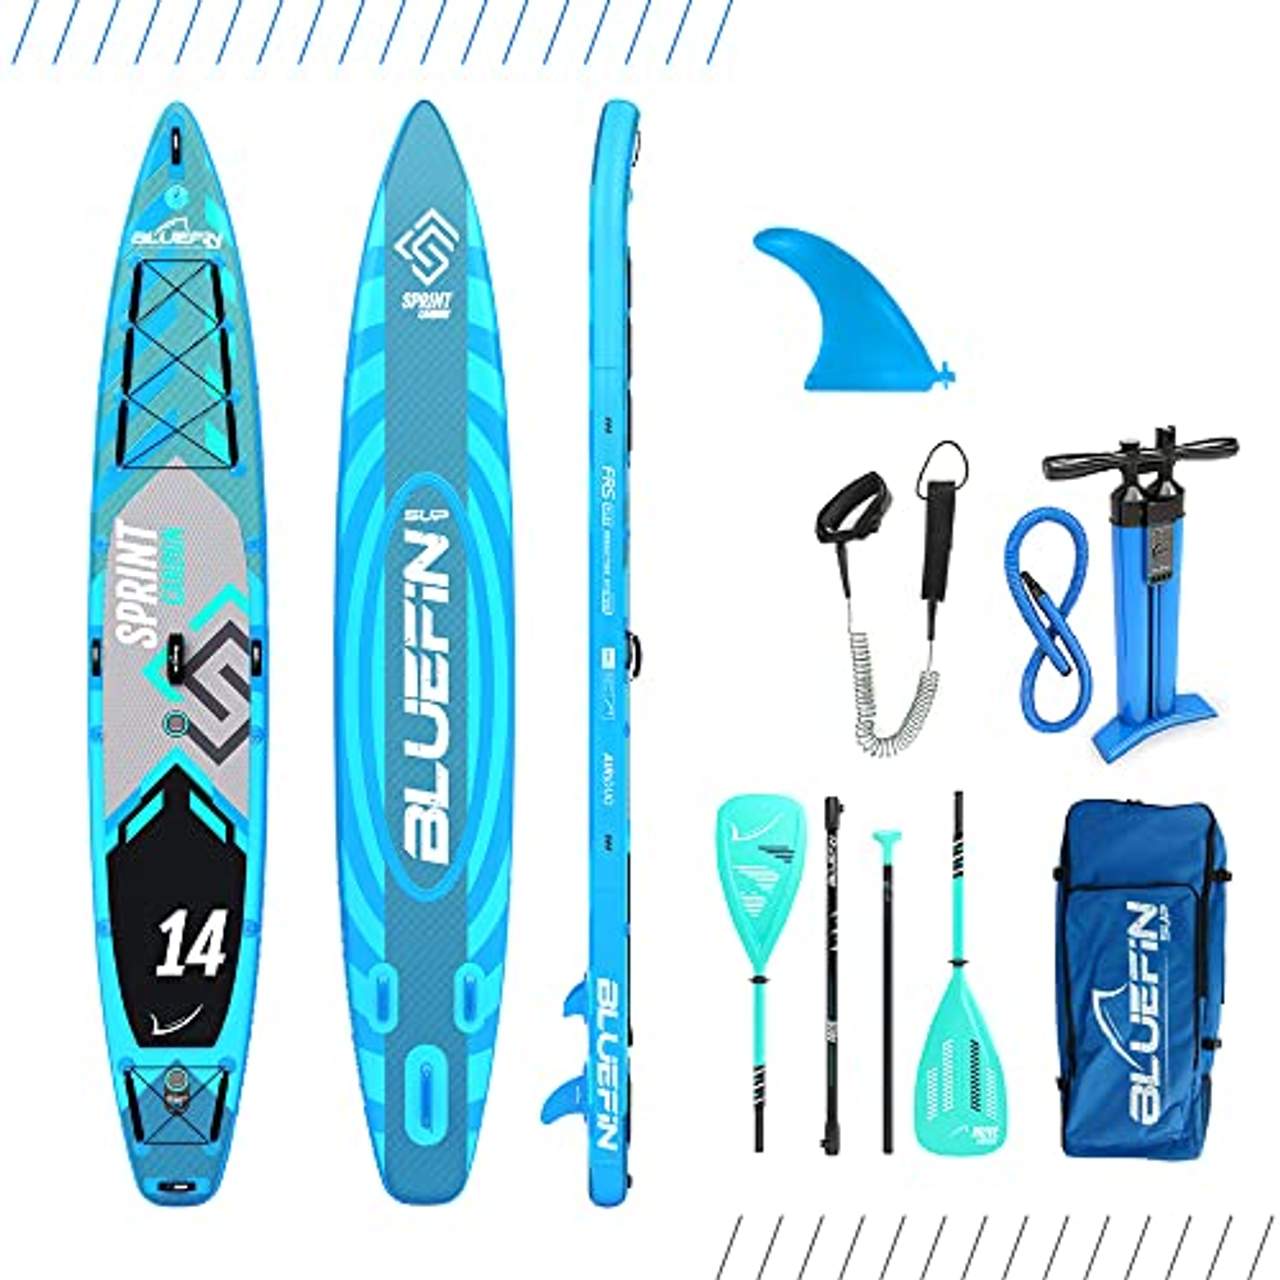 Bluefin SUP 14′ Sprint Carbon Stand Up Paddle Board Kit